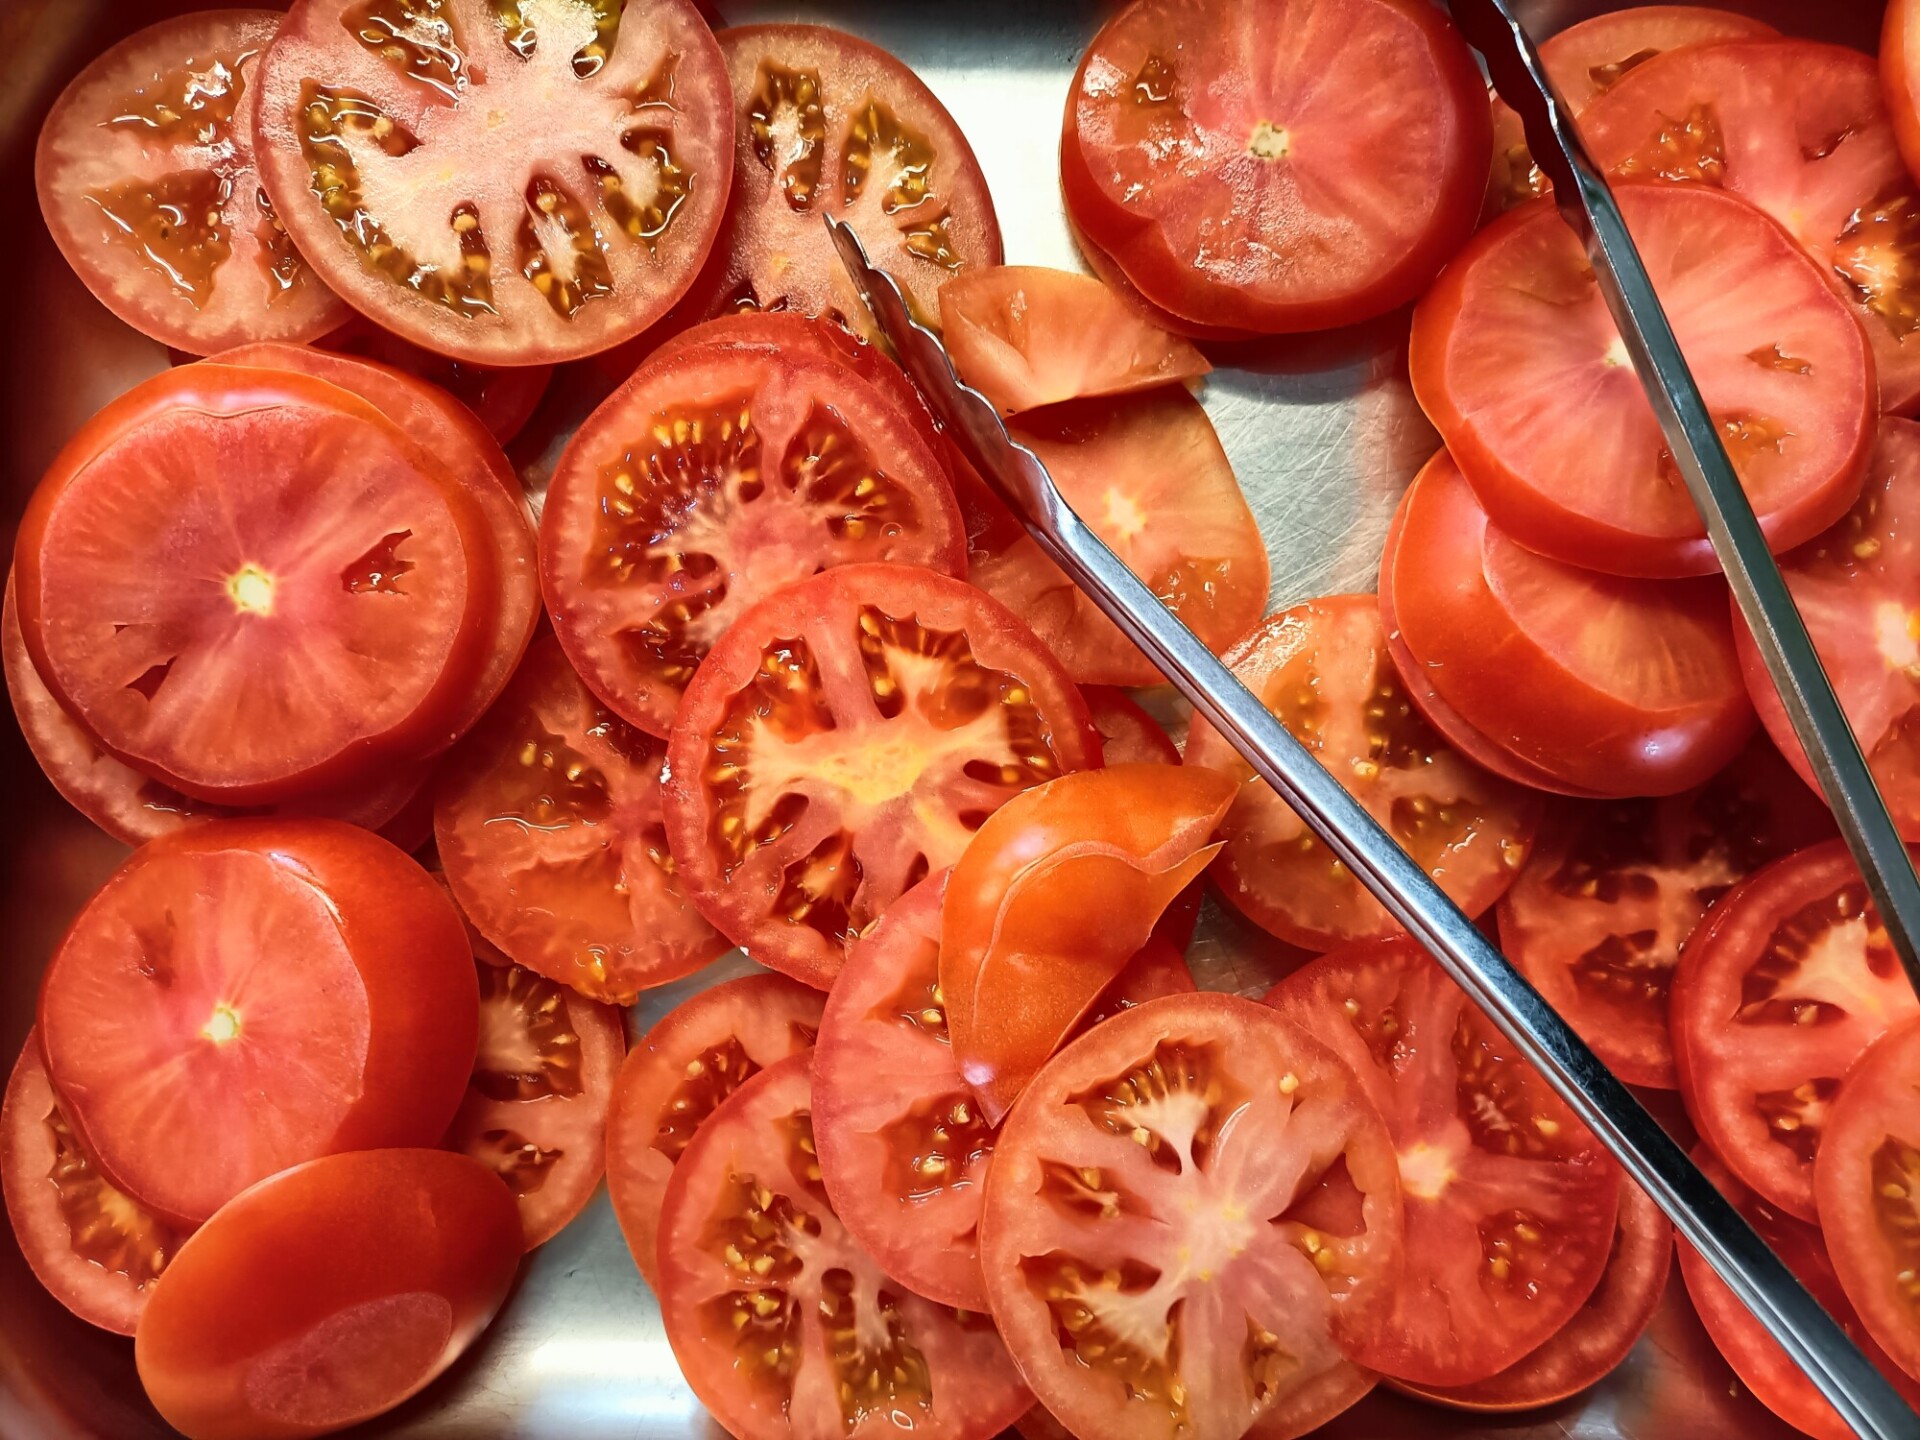 Juicy Sliced Tomatoes on a Plate